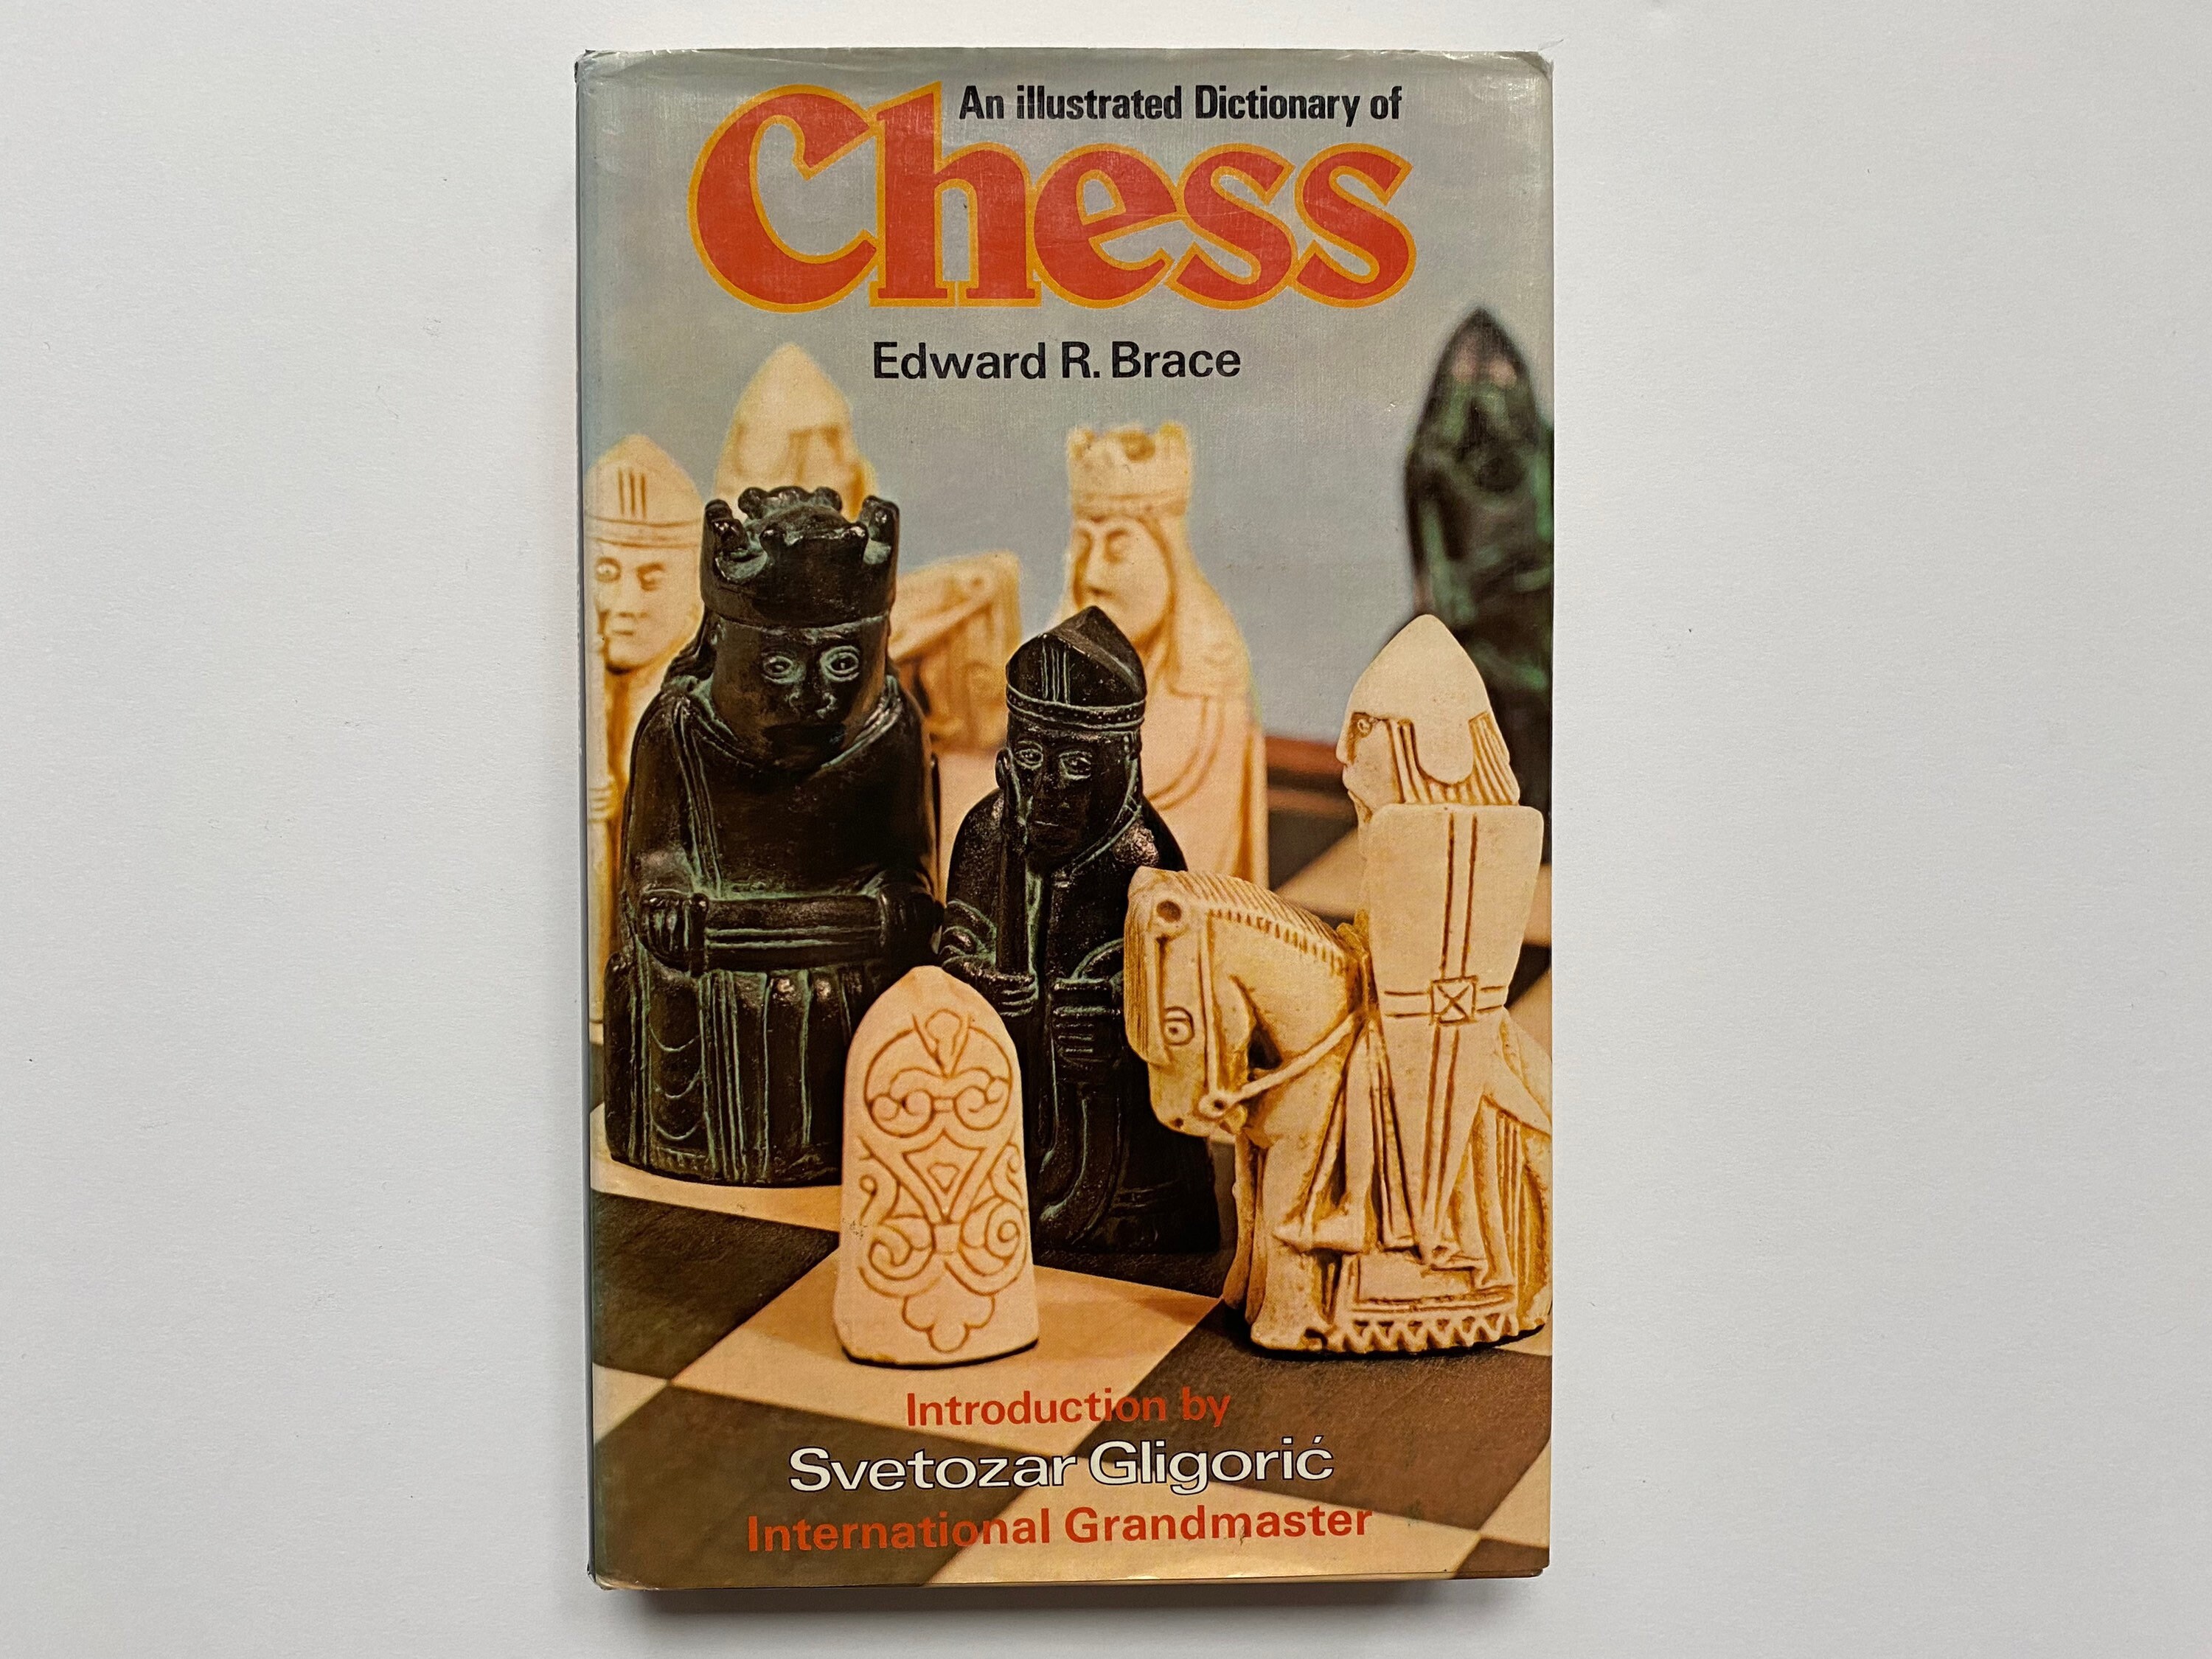 Alekhine, A - My Best Games of Chess, 1908-1923 - 1927, Ed 1960 (2